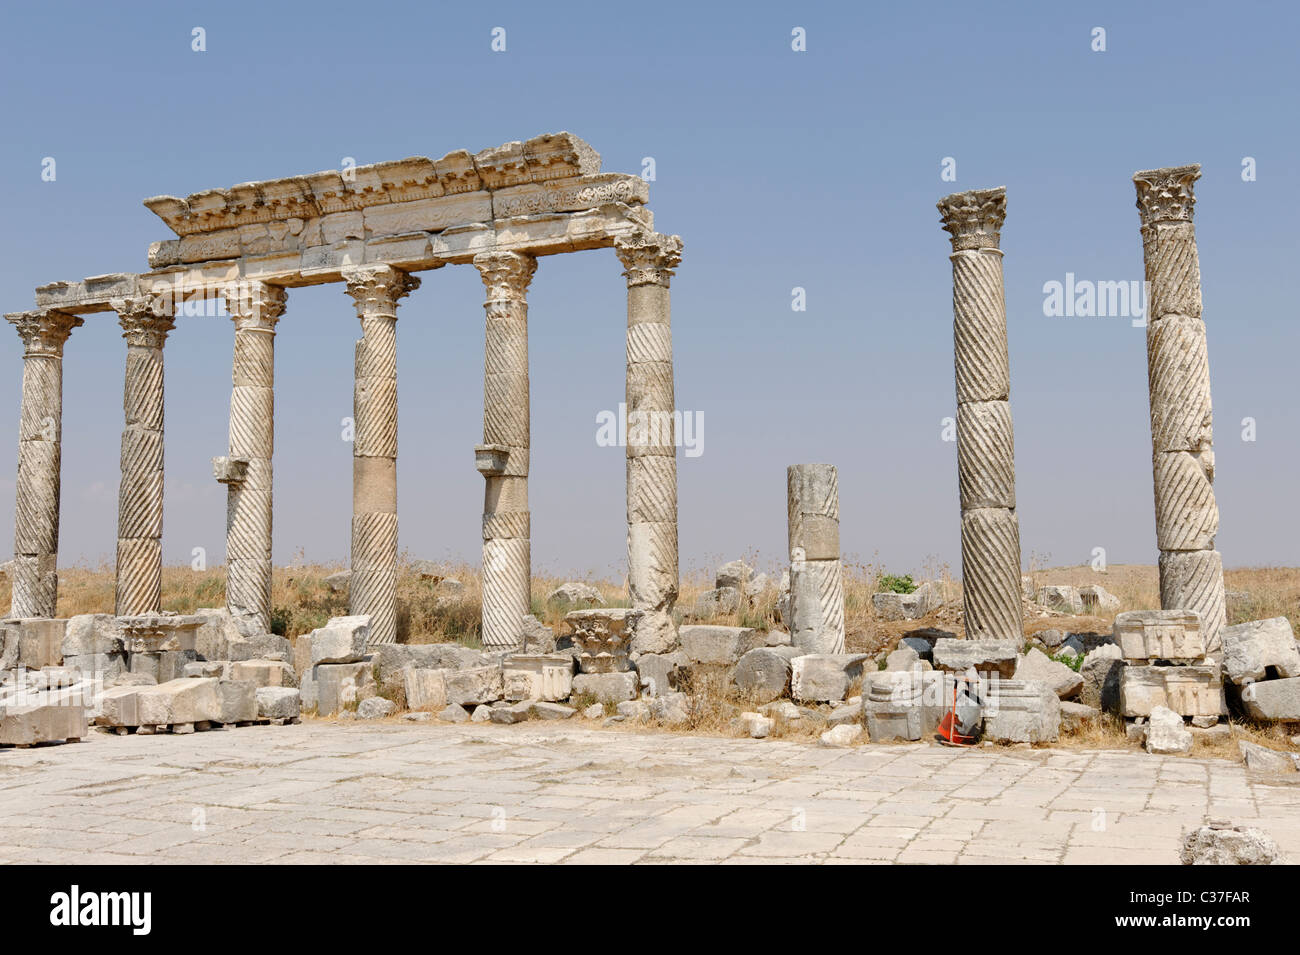 View of Columns along the Colonnaded Street marked with a deep twisting corkscrew fluting, unique to the ancient city of Apamea. Stock Photo